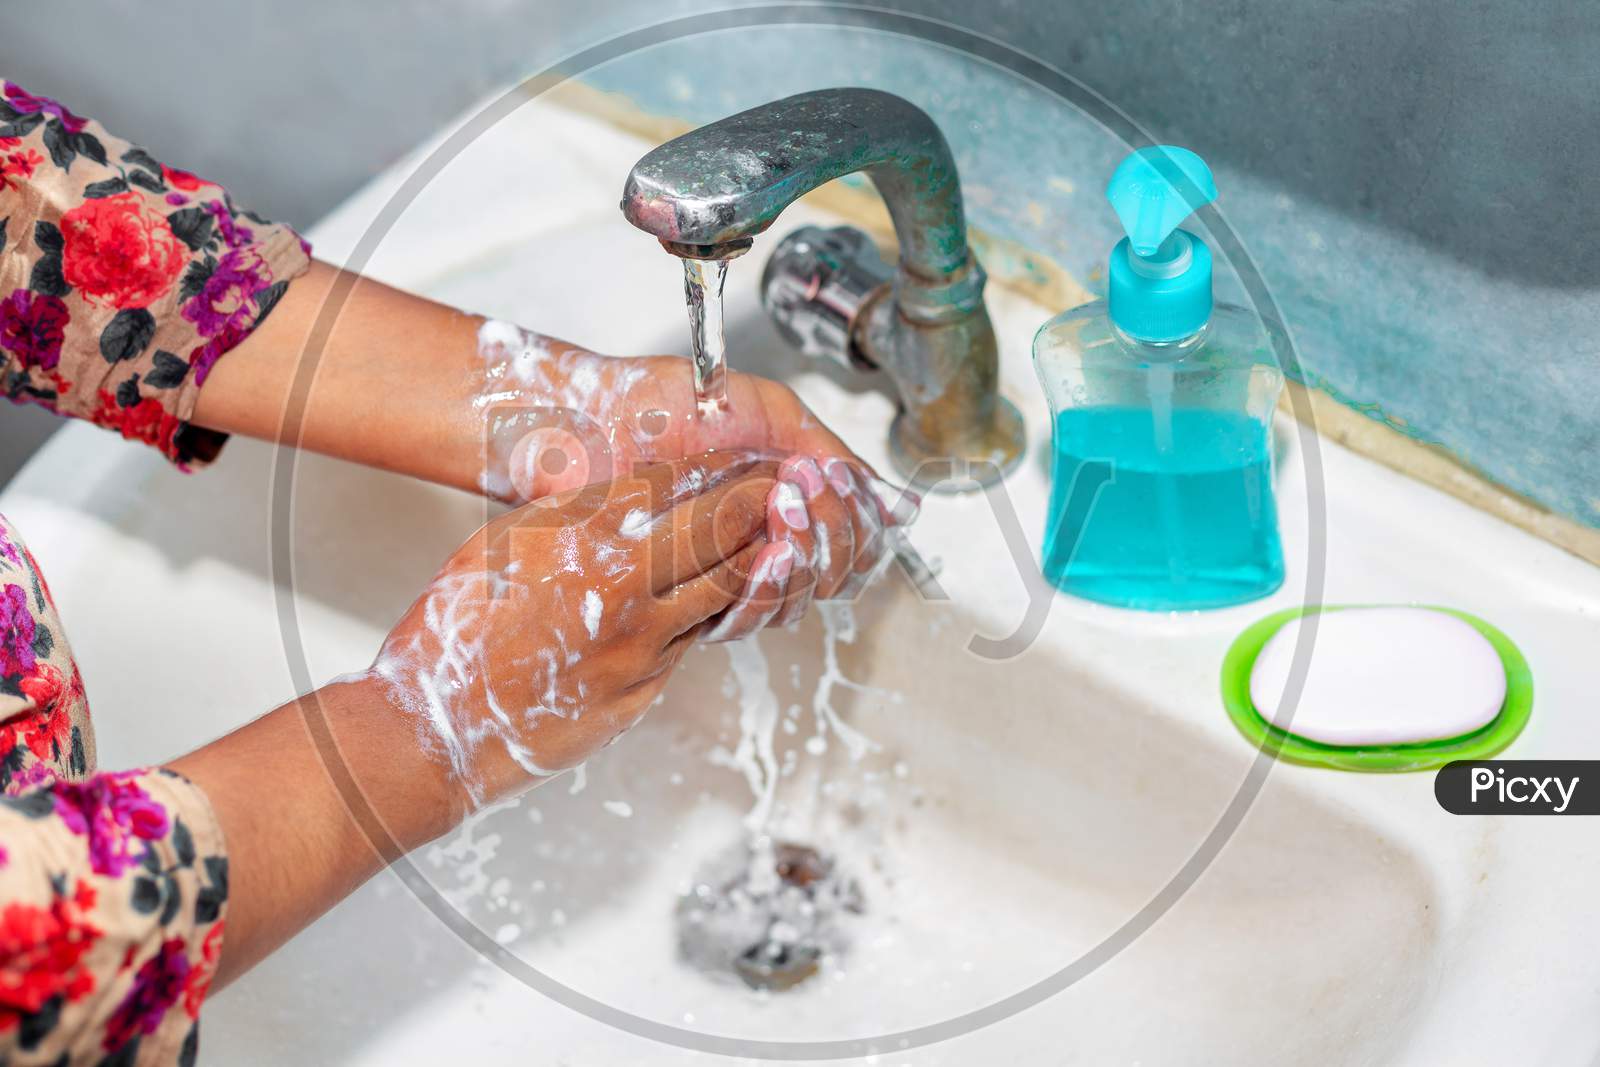 Women Use Liquid Soap For Rubbing And Washing Her Hands Under The Water Tap. Hygiene Concept. Wash Hands To Stop Spreading Coronavirus.